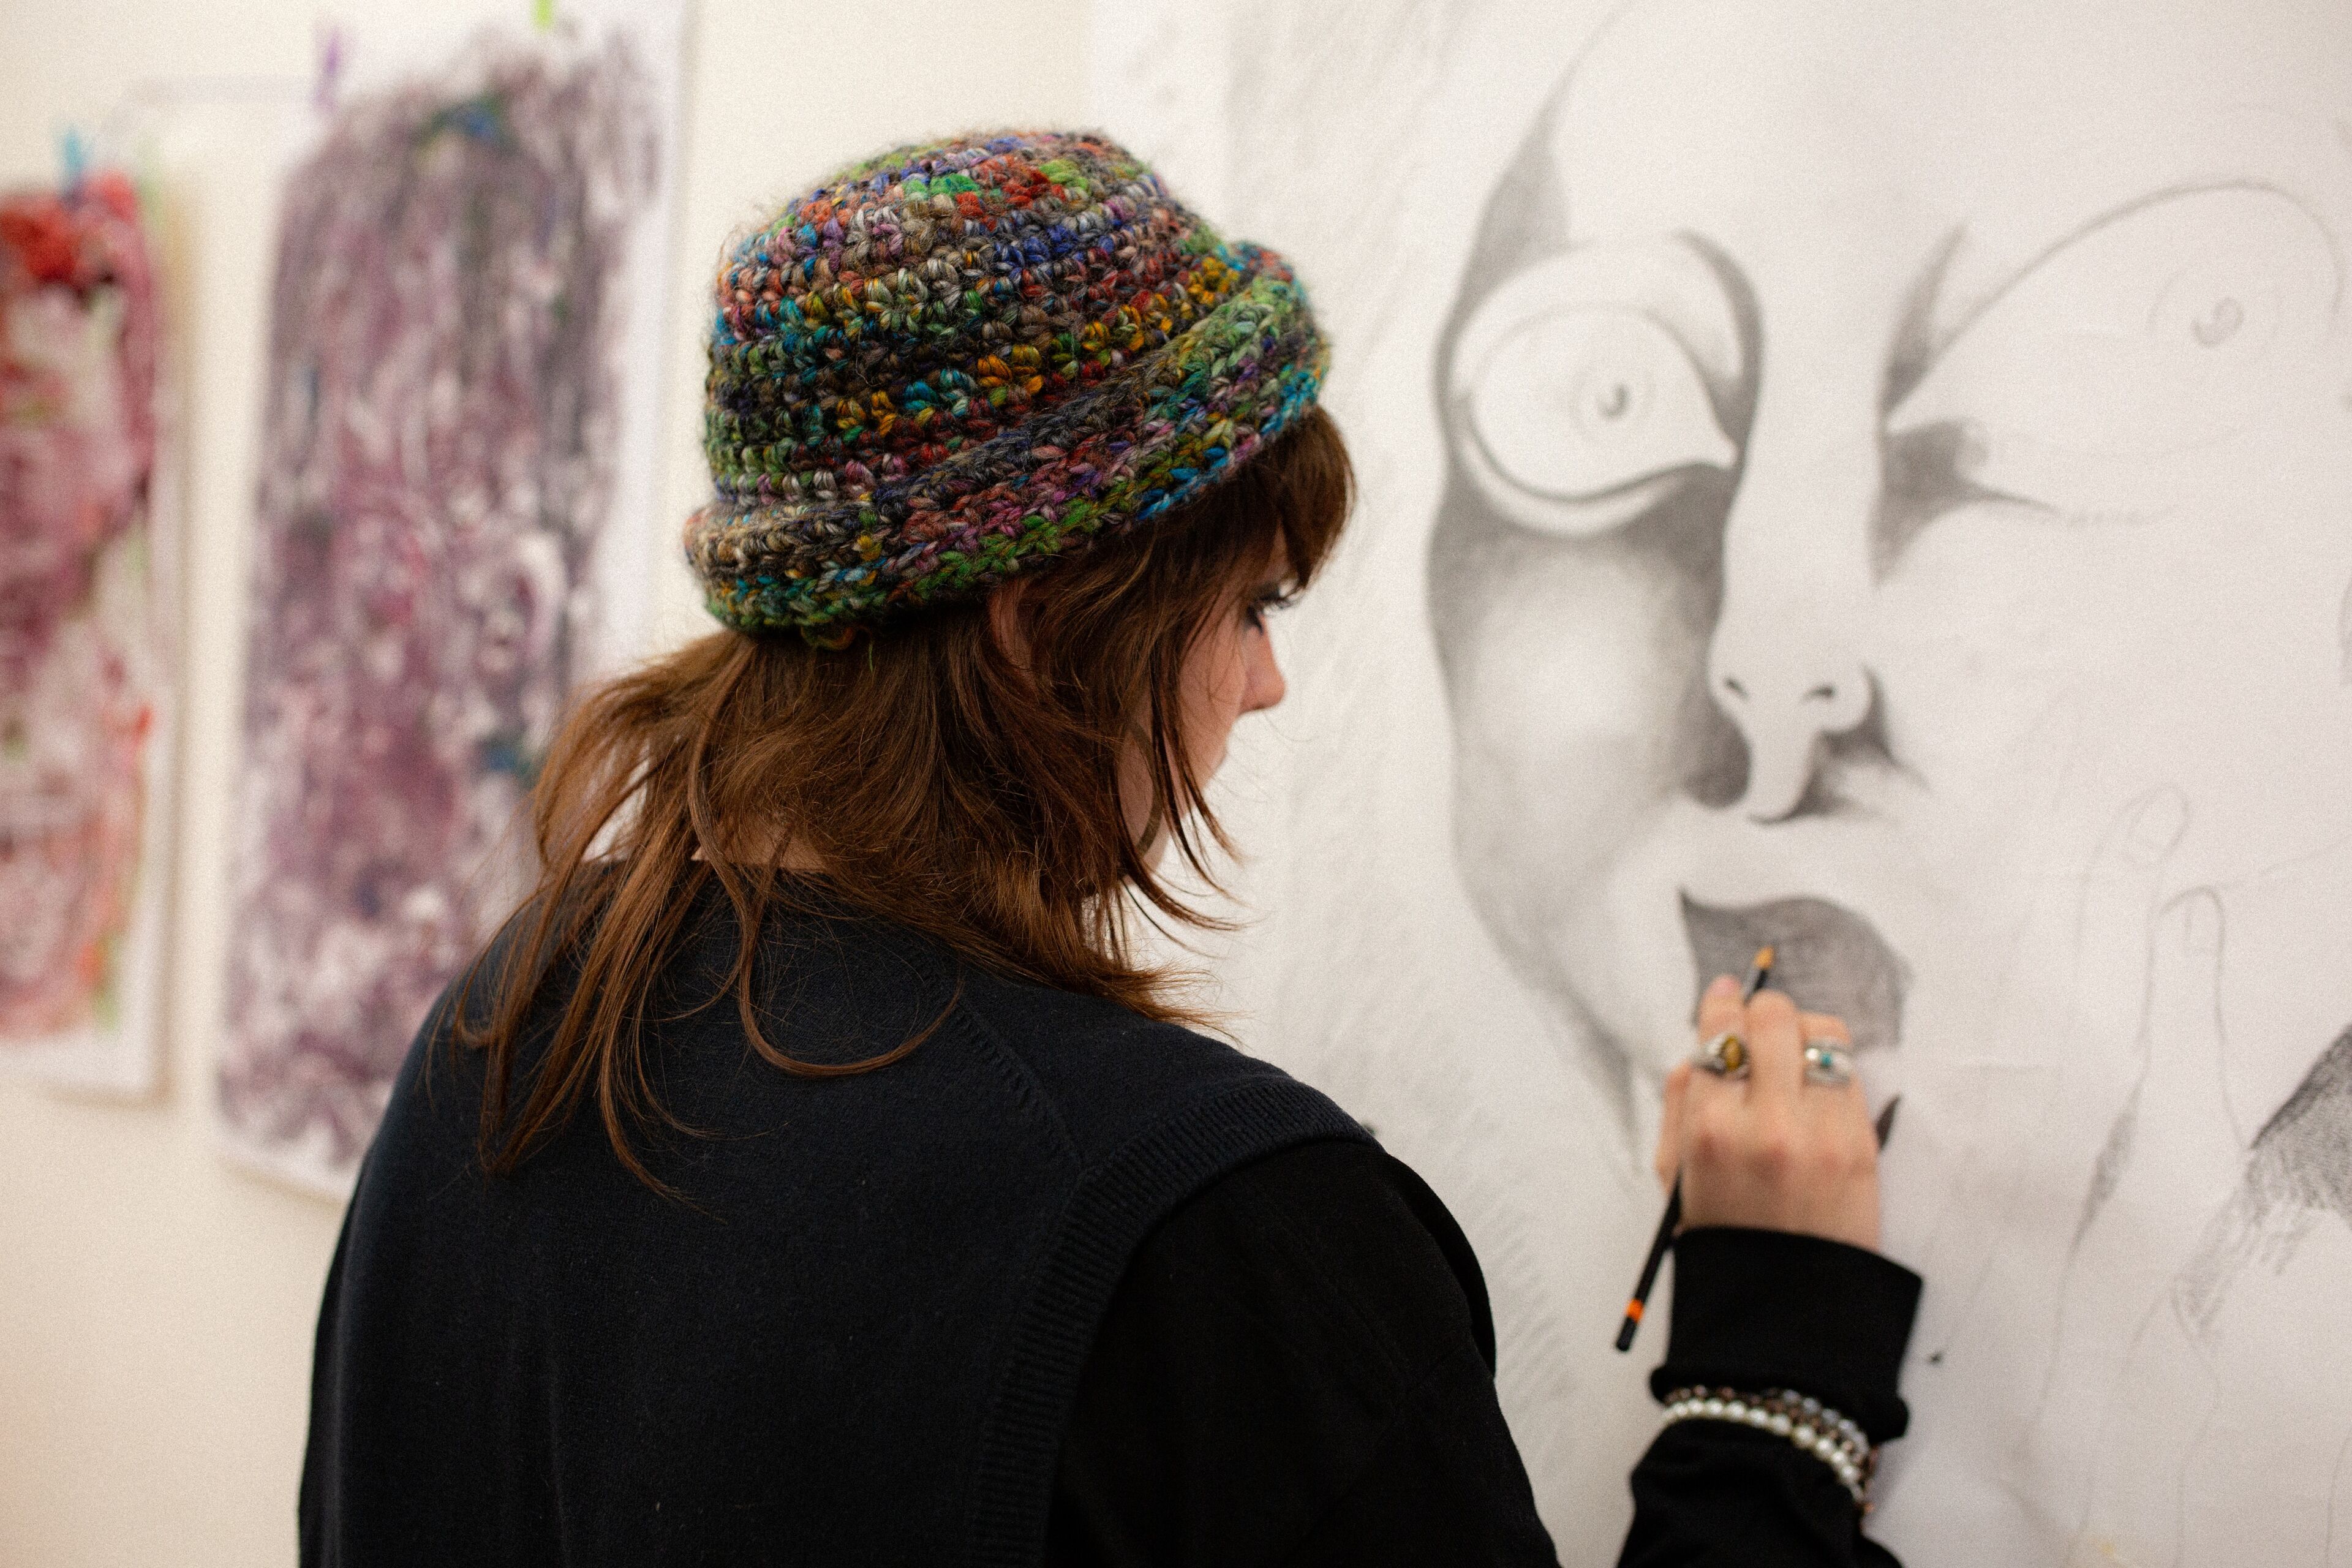 An artist meticulously sketches a portrait, engrossed in the act of bringing her visions to life.